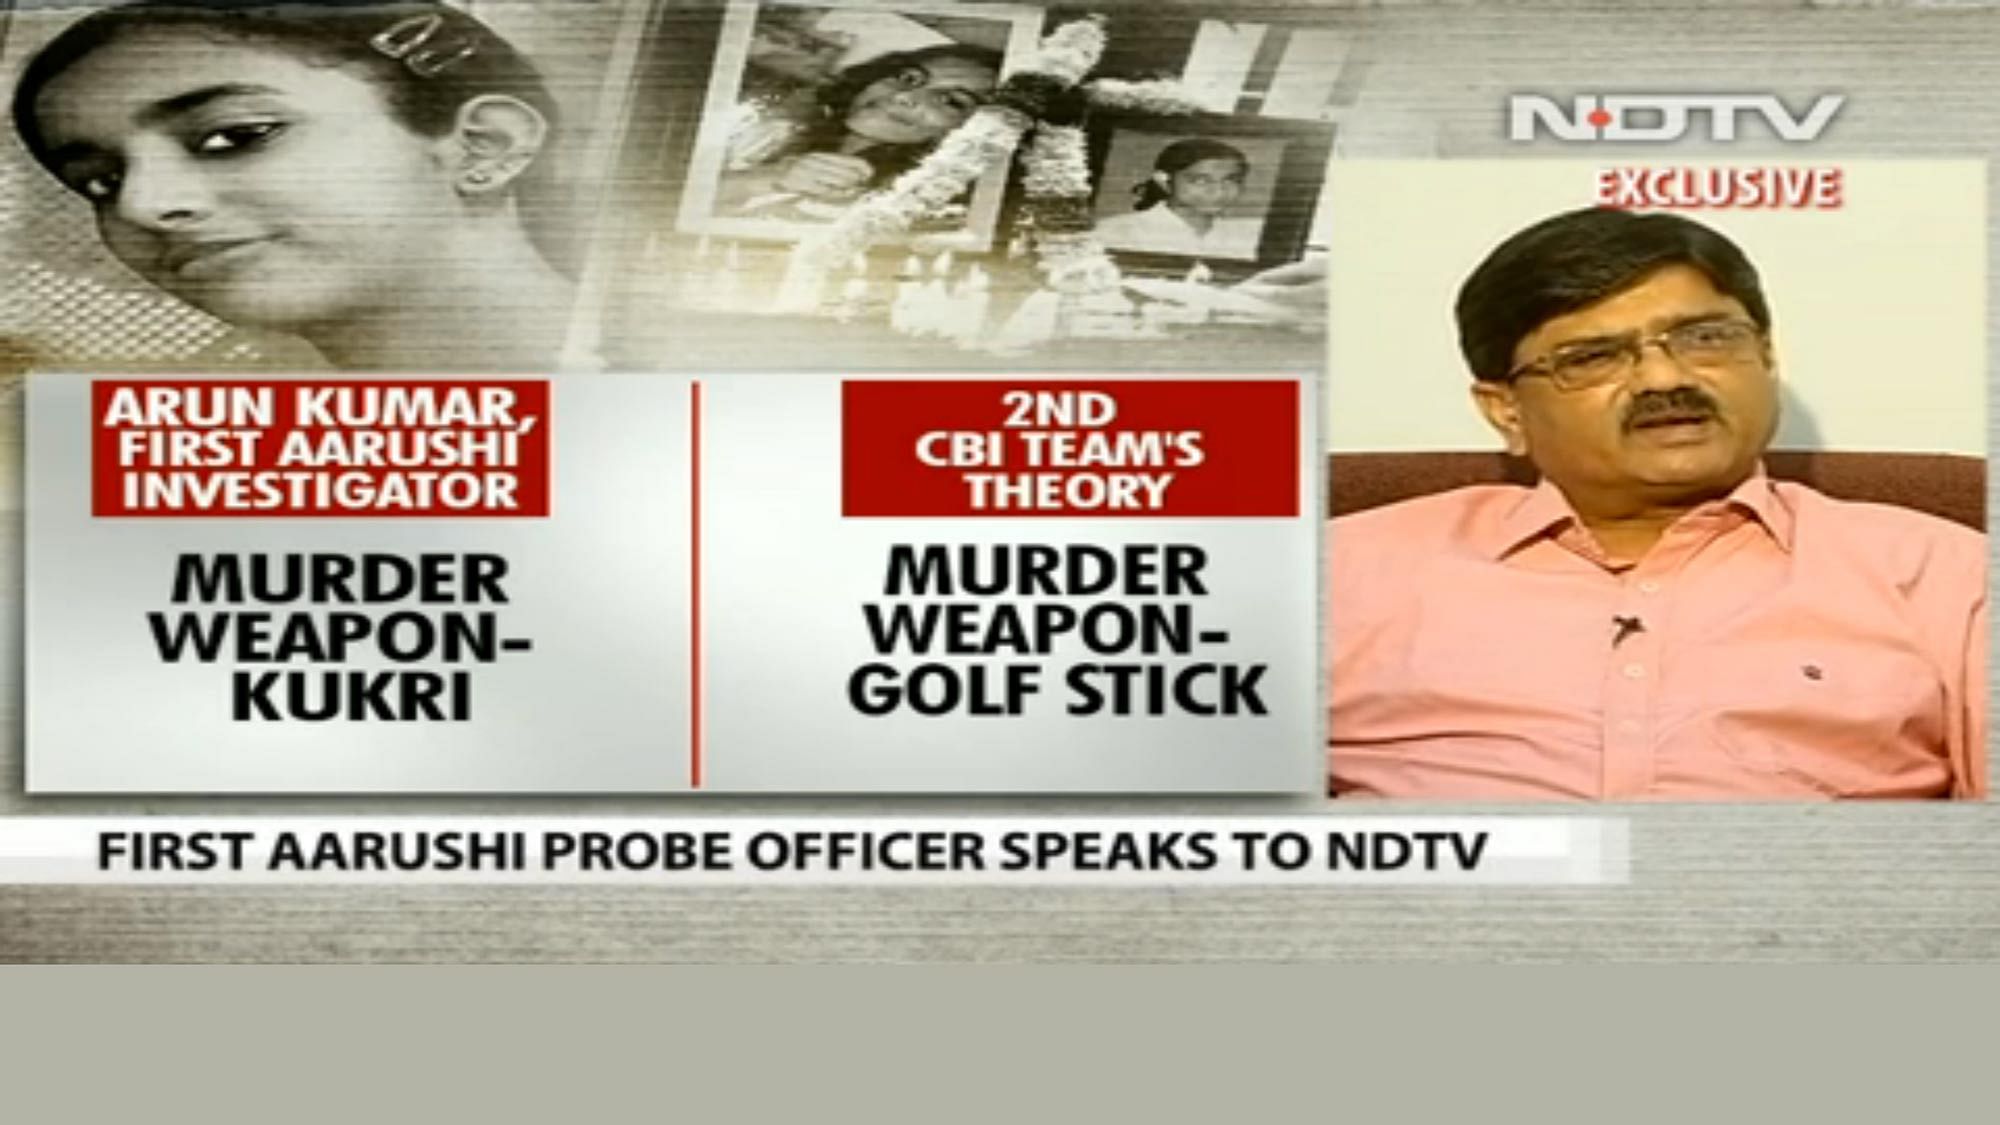 Screengrab of former CBI Joint Director’s interview to NDTV (Photo Courtesy: <a href="http://www.ndtv.com/video/player/agenda/officer-who-first-probed-aarushi-talwar-murder-speaks-to-ndtv/385589?site=full">NDTV</a>)